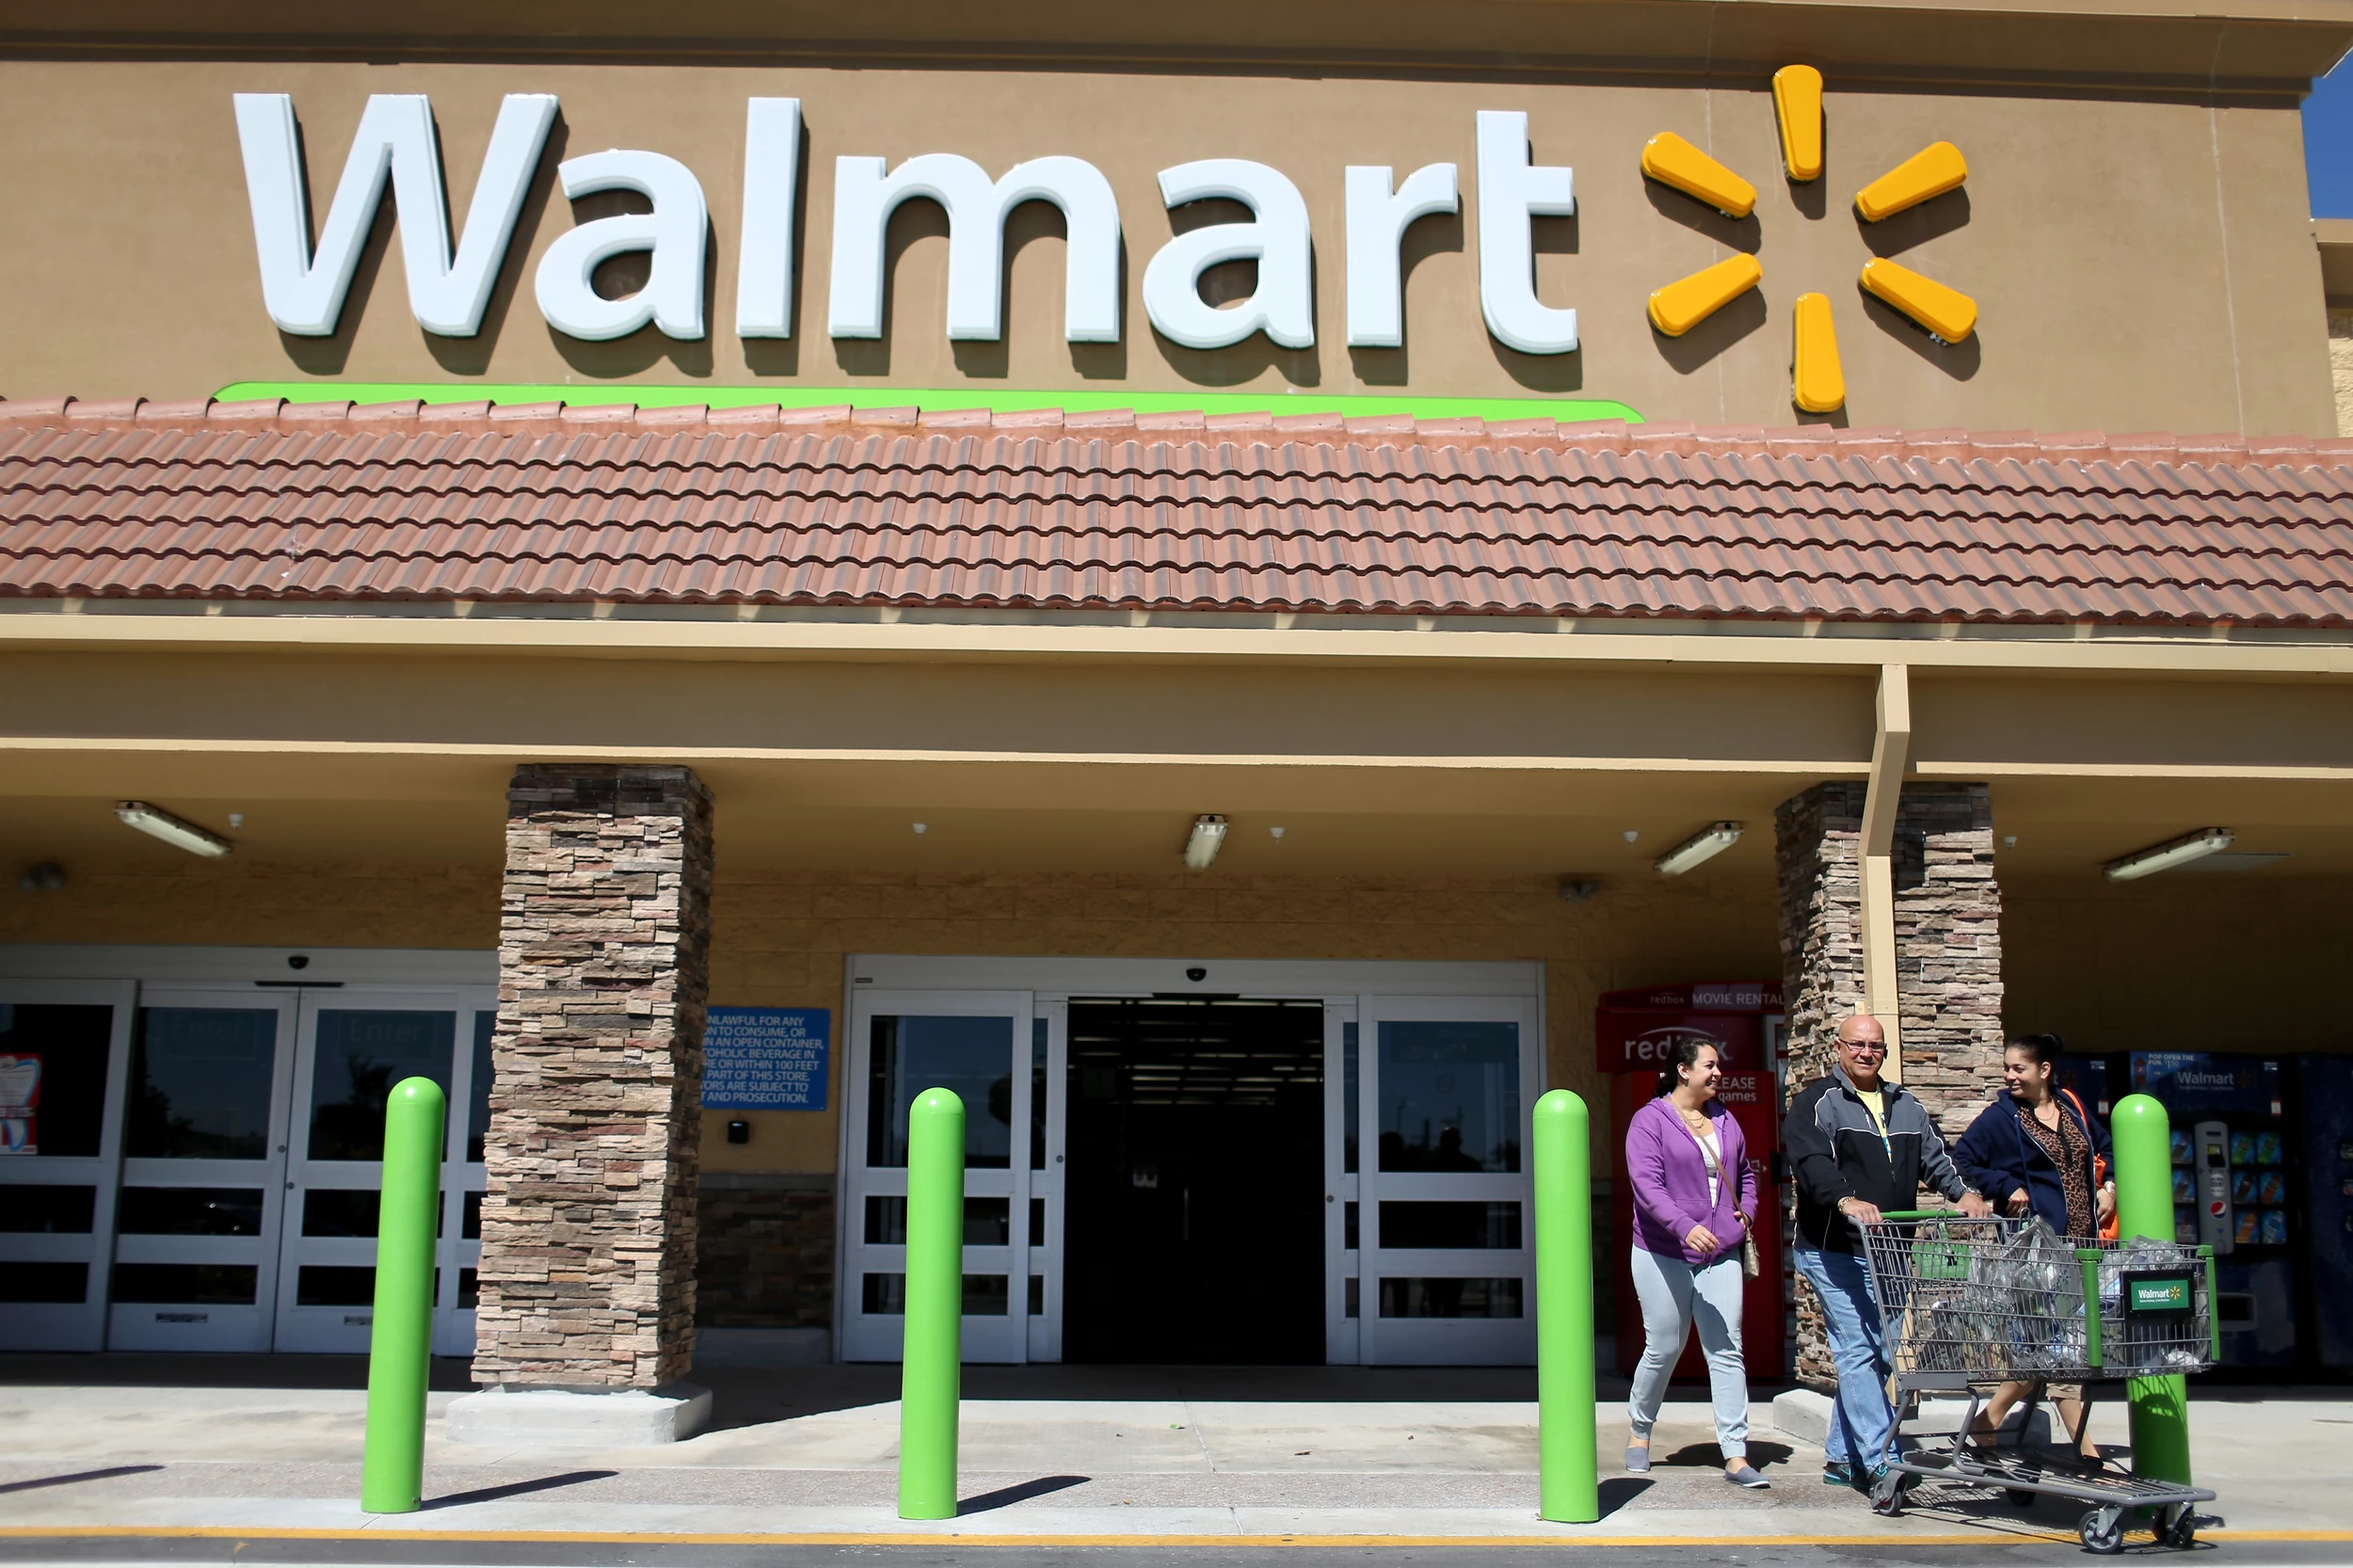 New Cheyenne Wal-Mart Gets Ready To Open Their Doors By Months End